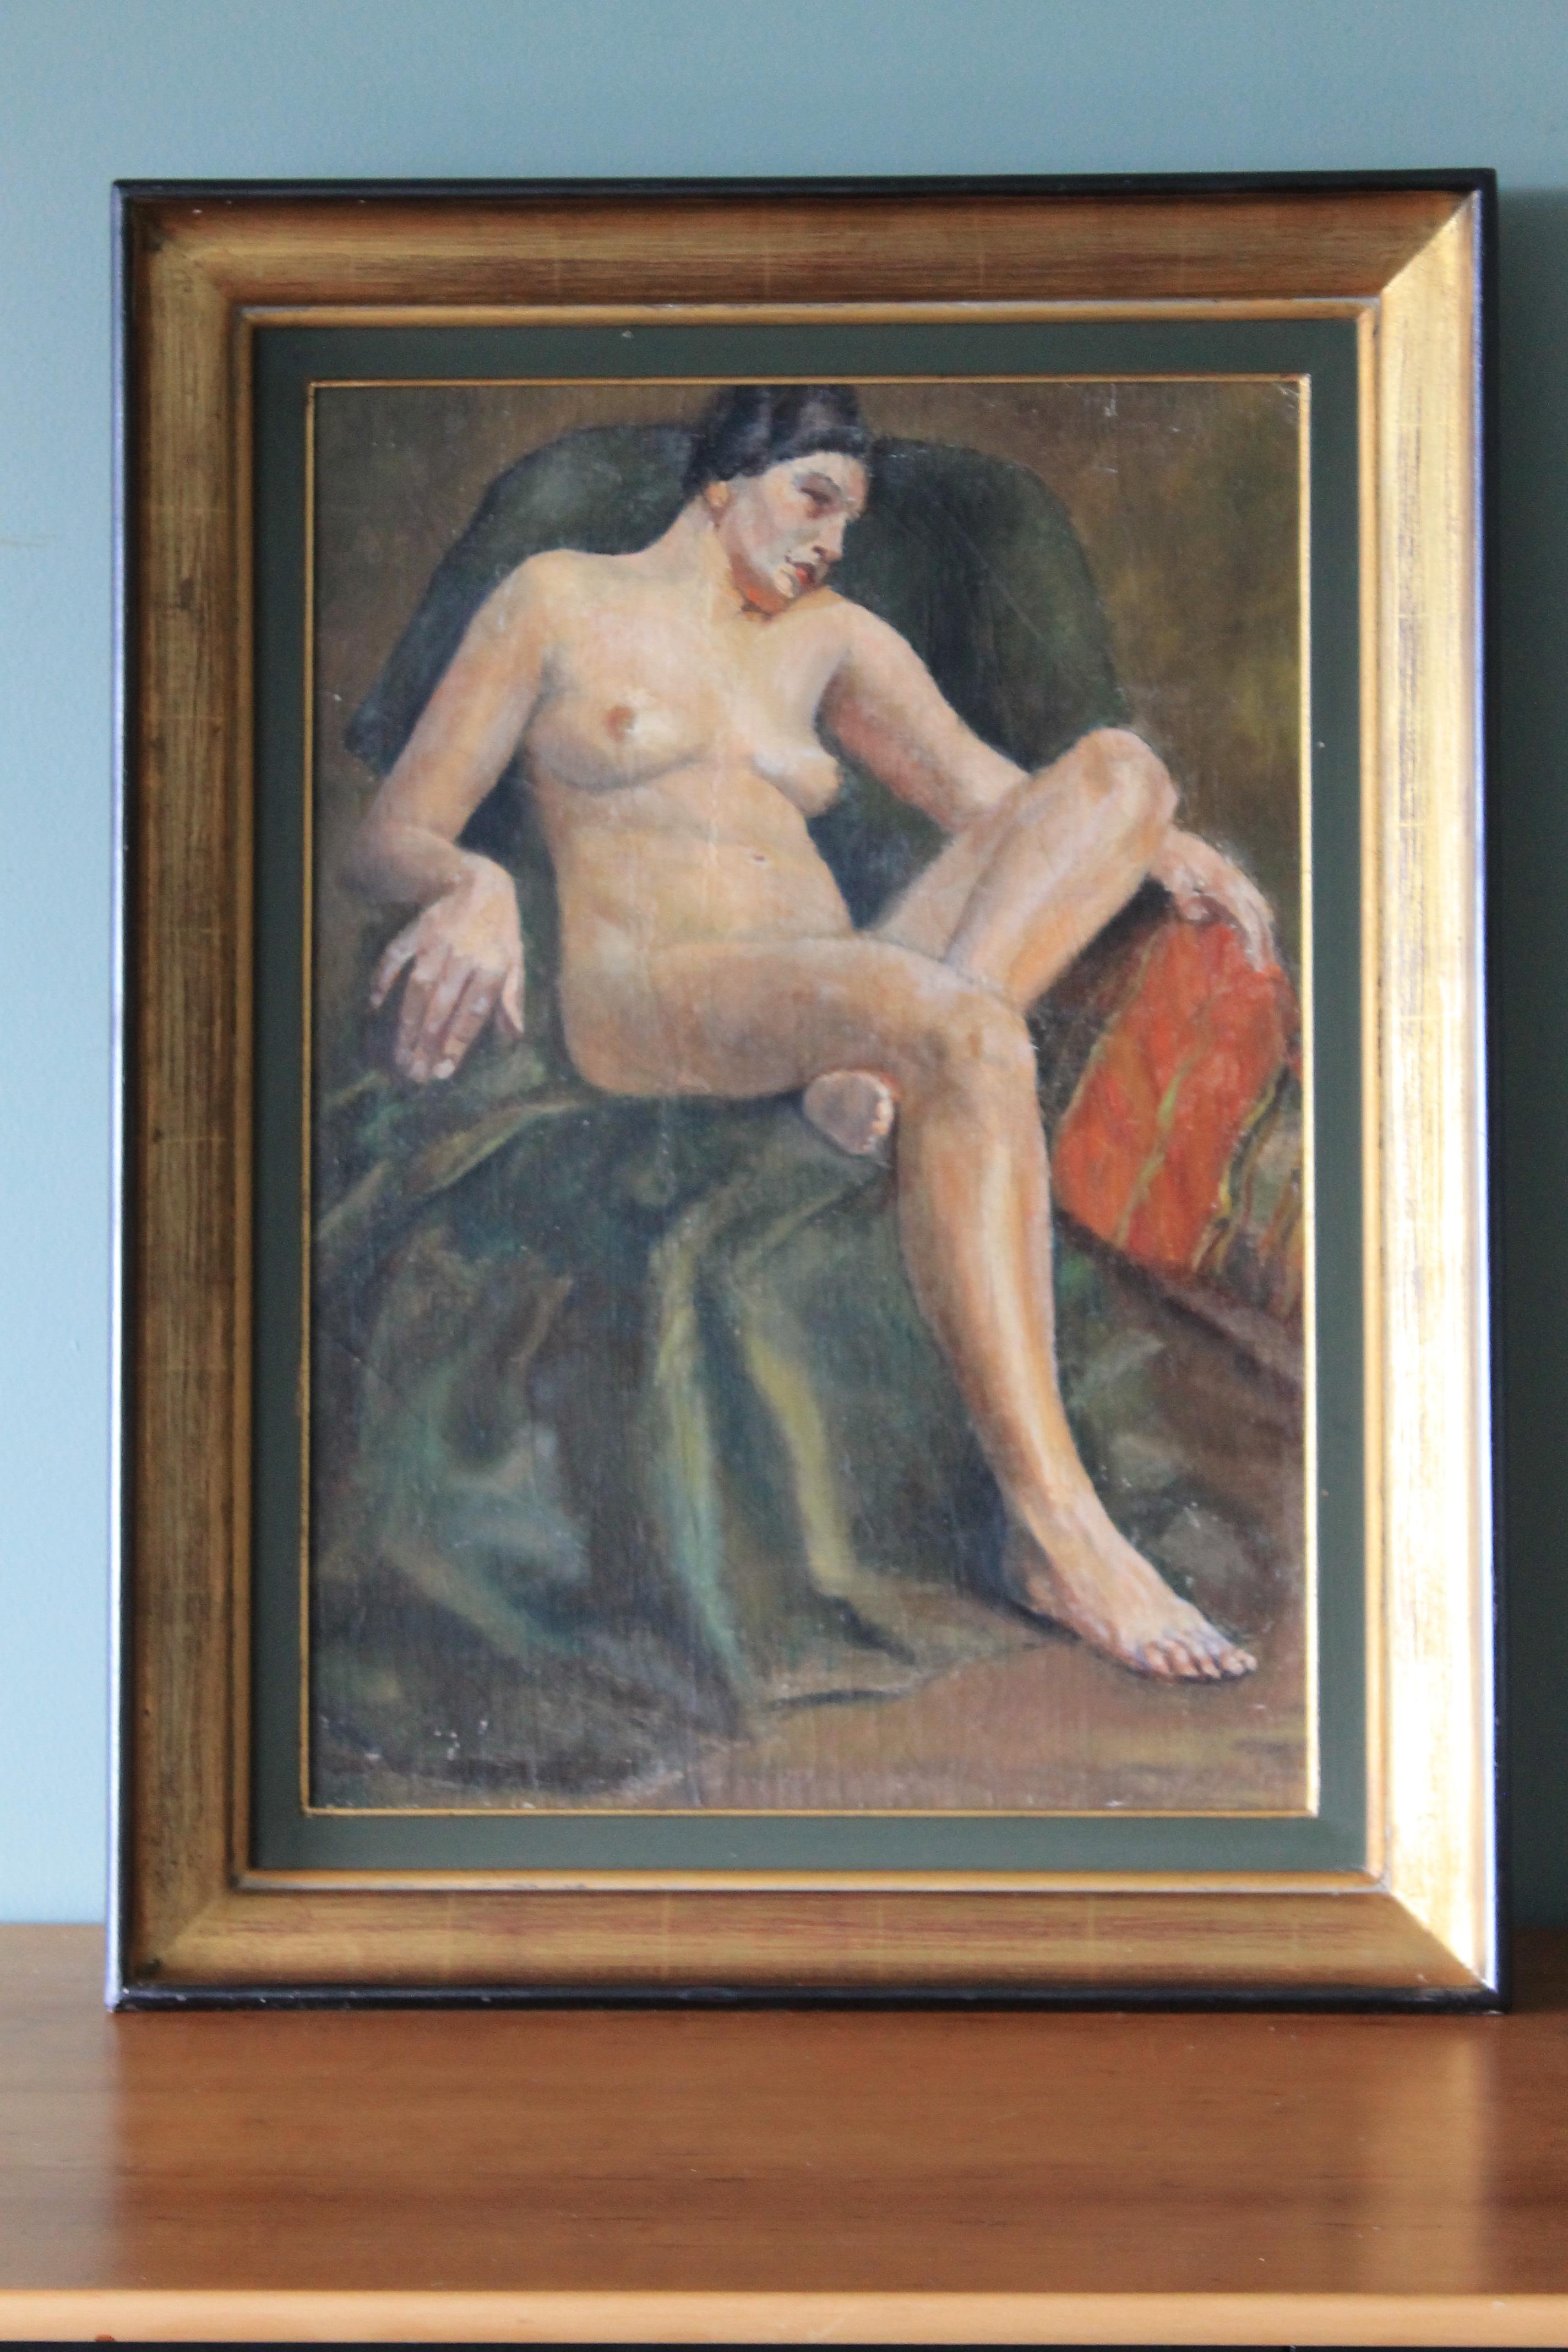 Antique nude oil portrait of a woman, French School - Painting by Unknown